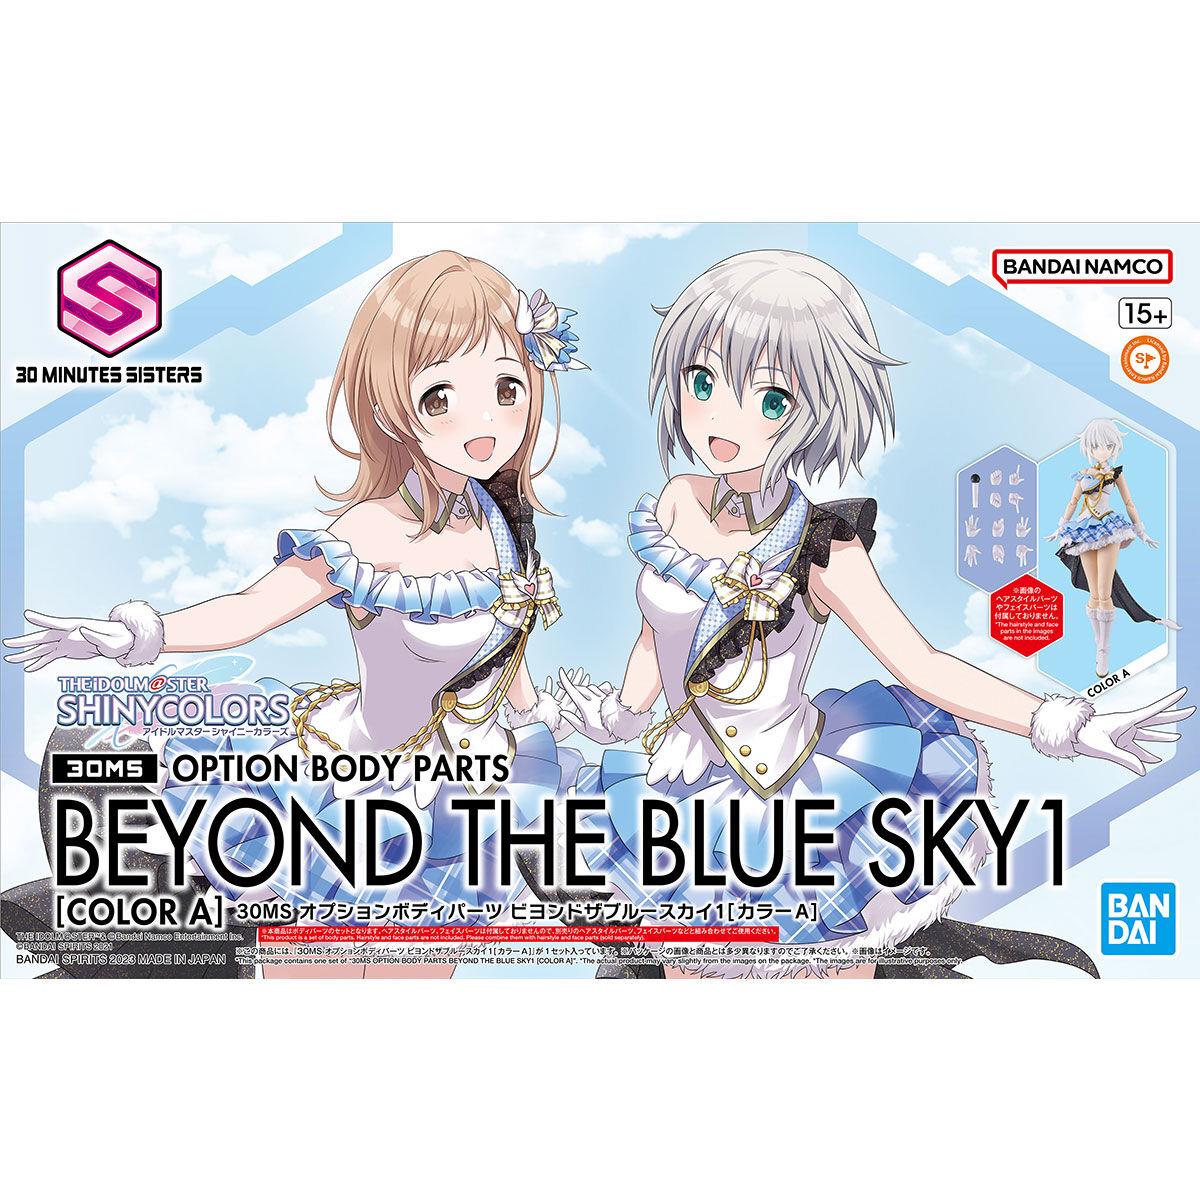 30 Minutes Sisters x Idolm@ster: Beyond the Blue Sky 1 (Colour A) Model Option Pack